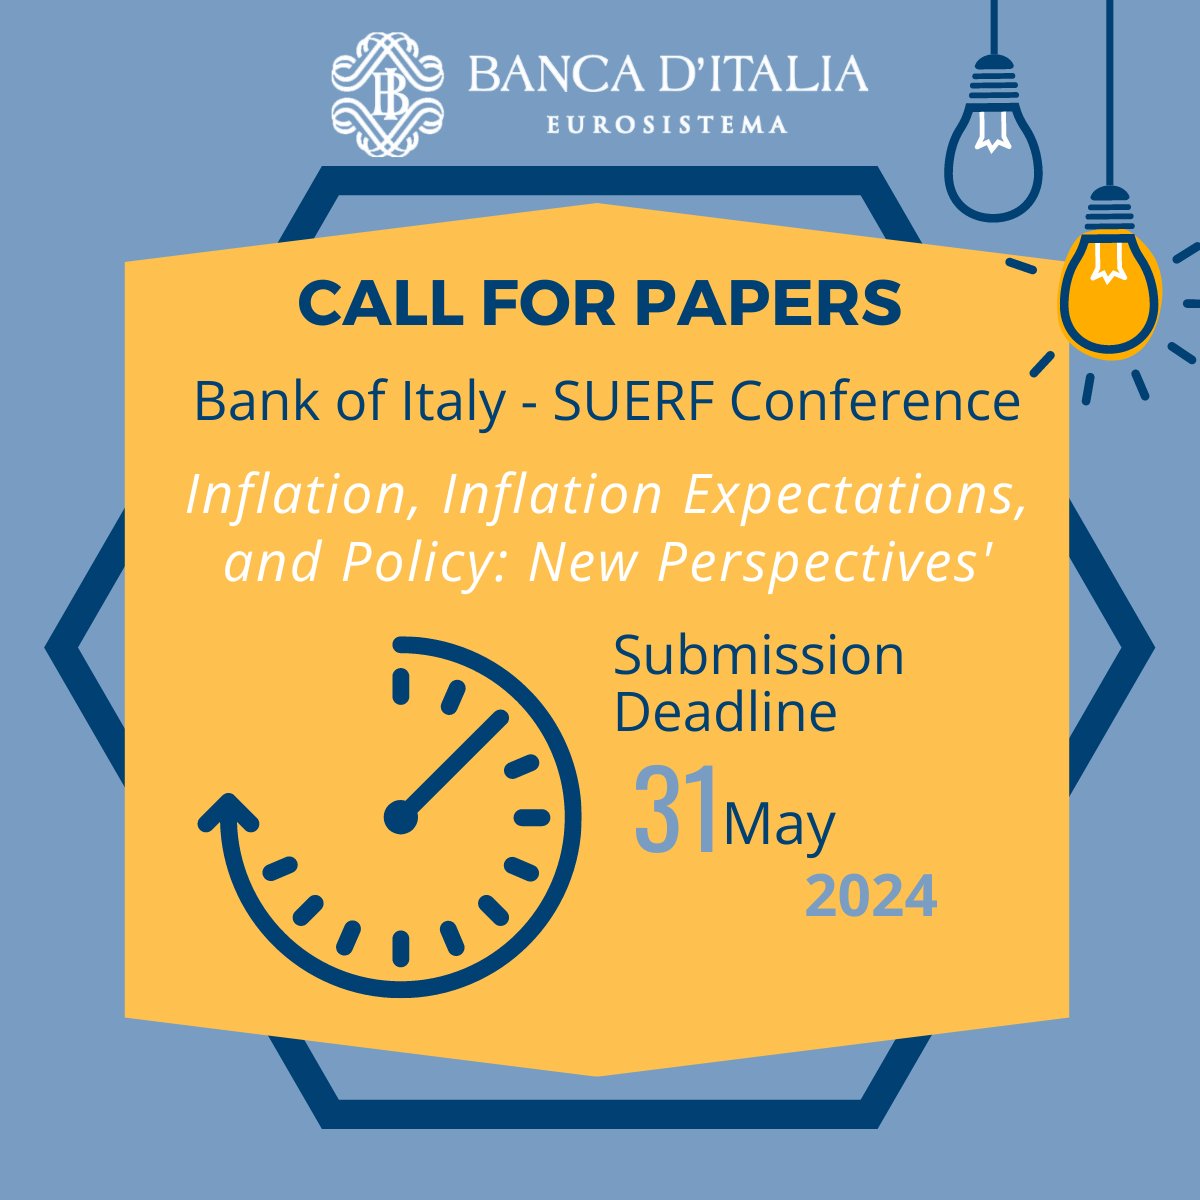 📢 #CallForPapers 📌 Conferenza Banca d'Italia - SUERF 'Inflation, Inflation Expectations, and Policy: New Perspectives' #Roma 18-19 novembre 2024 🗓️ Scadenza: 31 maggio 2024 suerf.org/wp-content/upl… Keynote speakers: Philip R. Lane (@ECB) terrà la SUERF Marjolin Lecture, Gauti